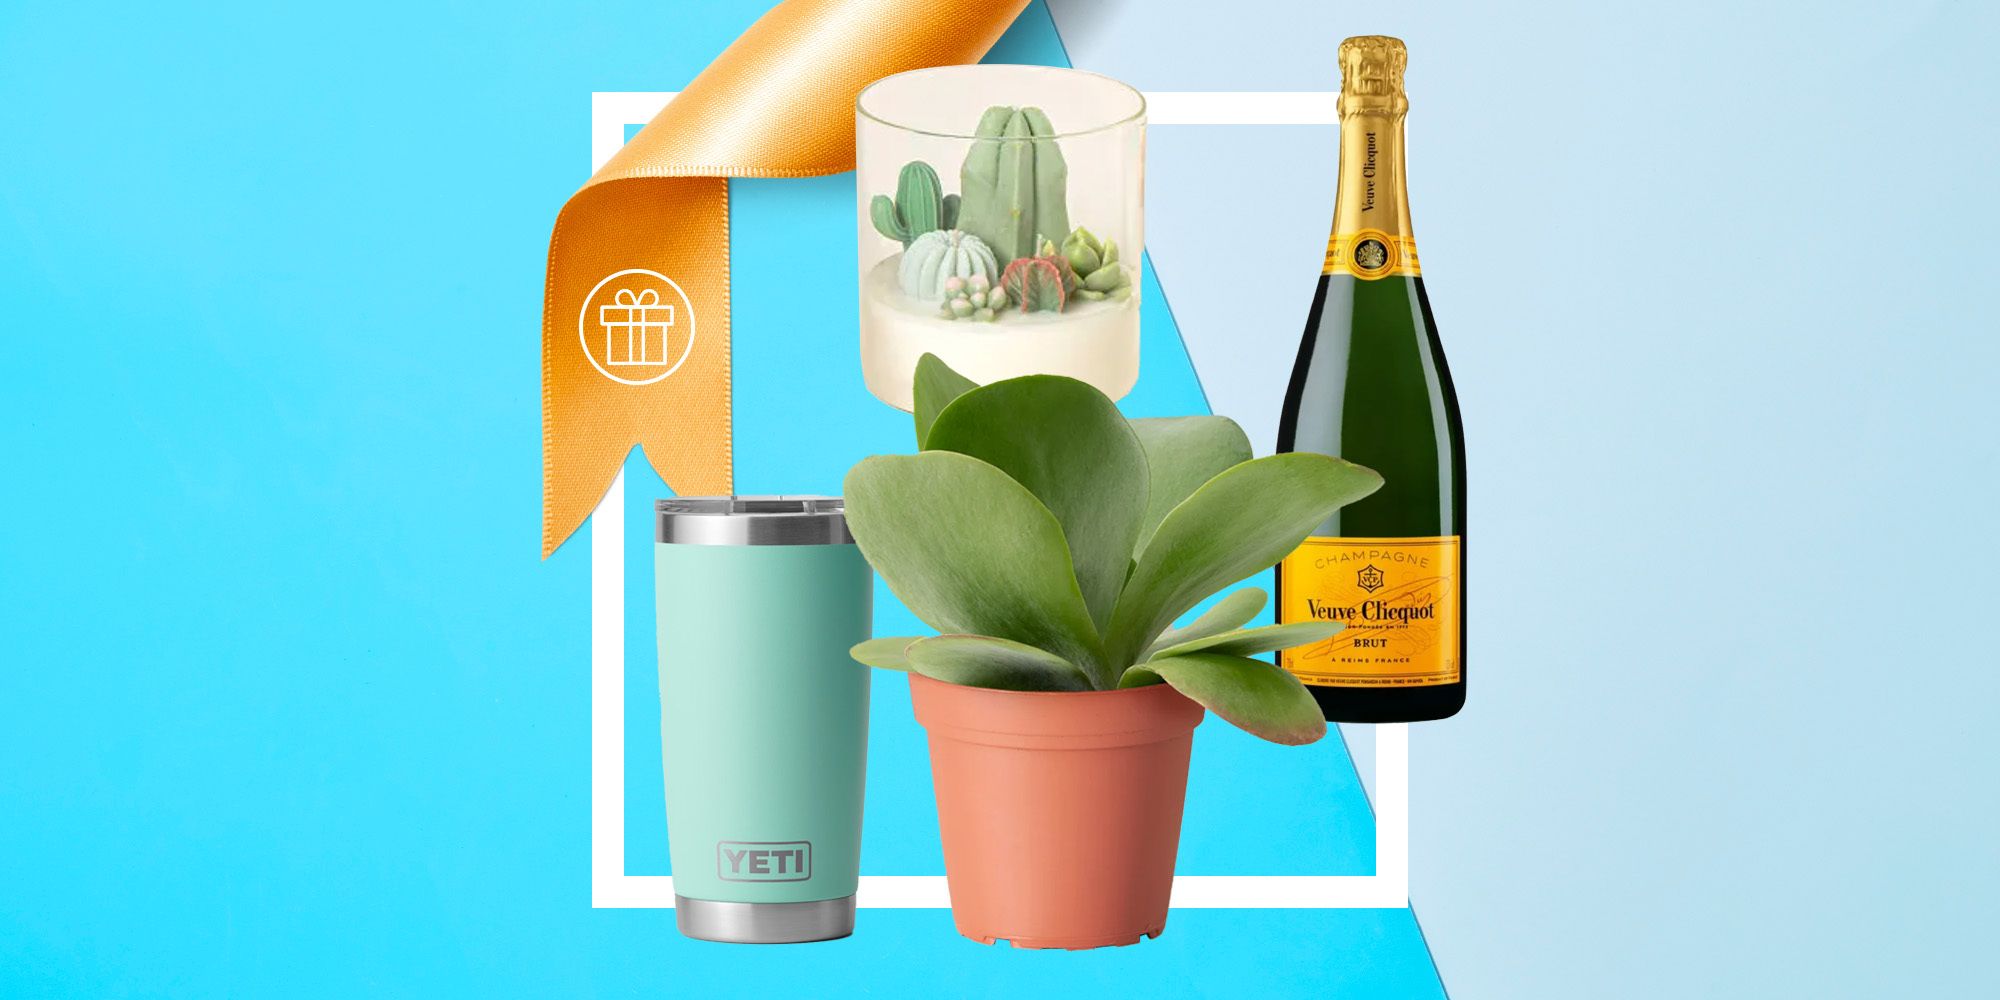 40 Best Gifts for Co-Workers Under $25 in 2023